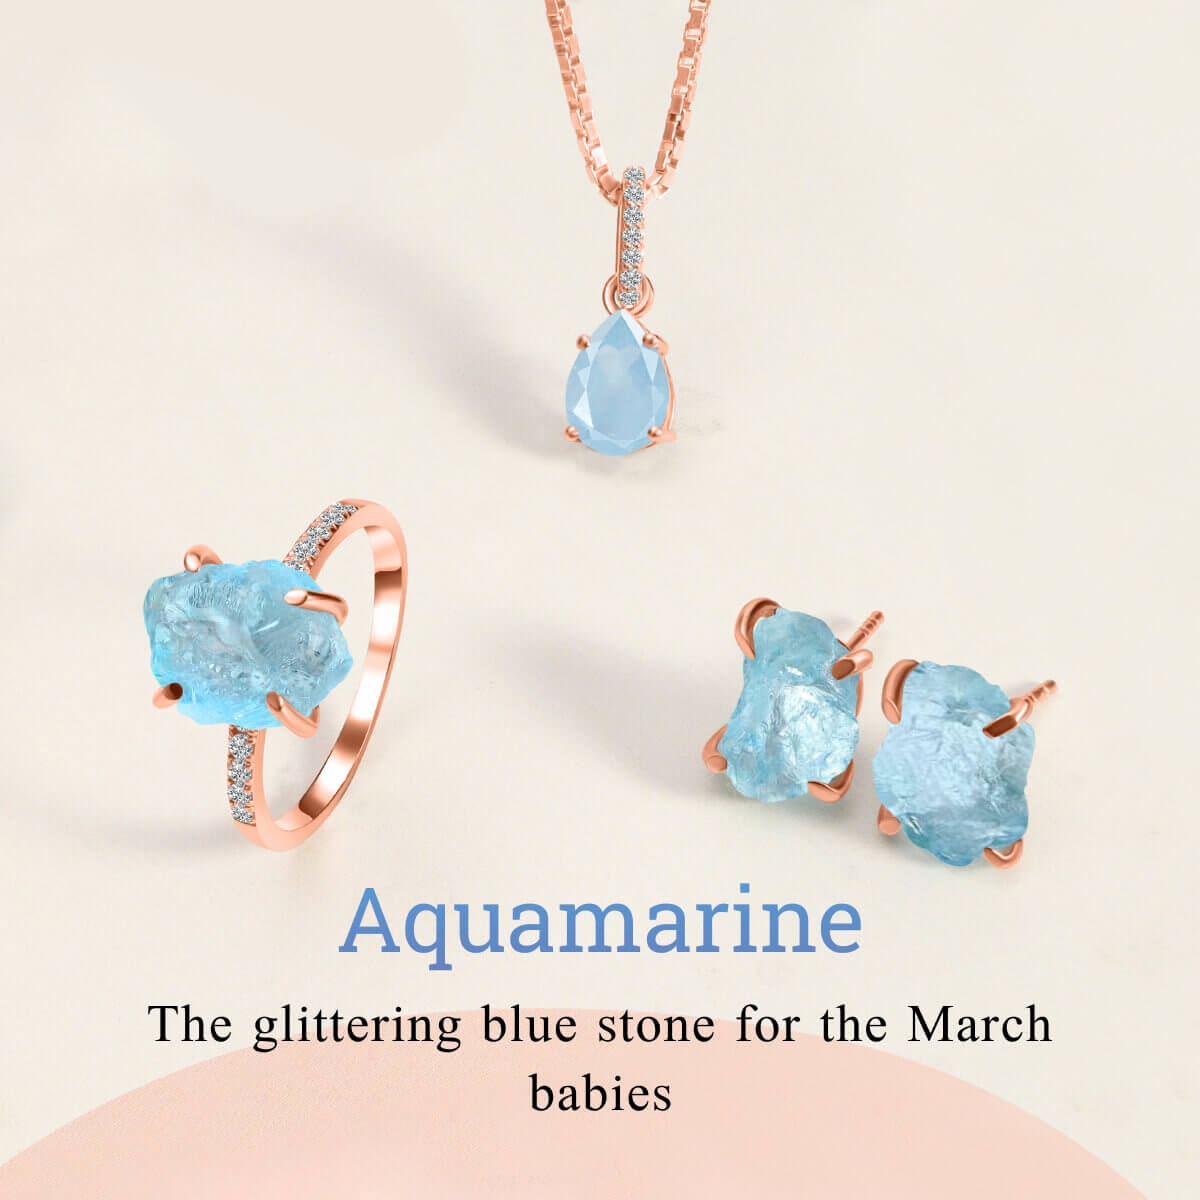 Aquamarine - The glittering blue stone for the March babies